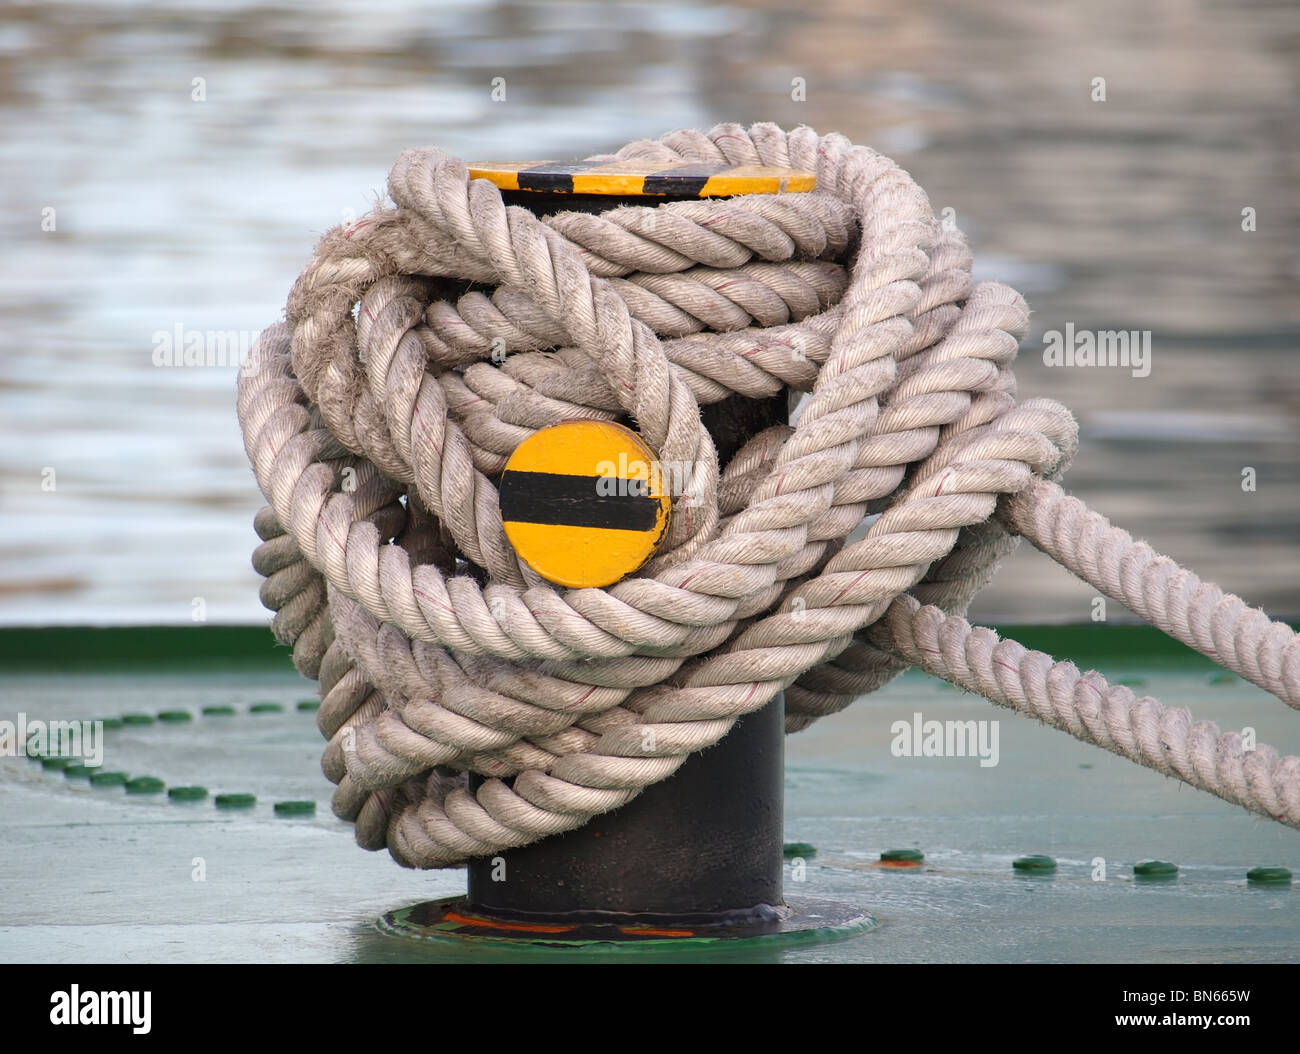 https://c8.alamy.com/comp/BN665W/a-thick-rope-is-wrapped-around-a-strong-post-on-deck-of-a-ship-BN665W.jpg